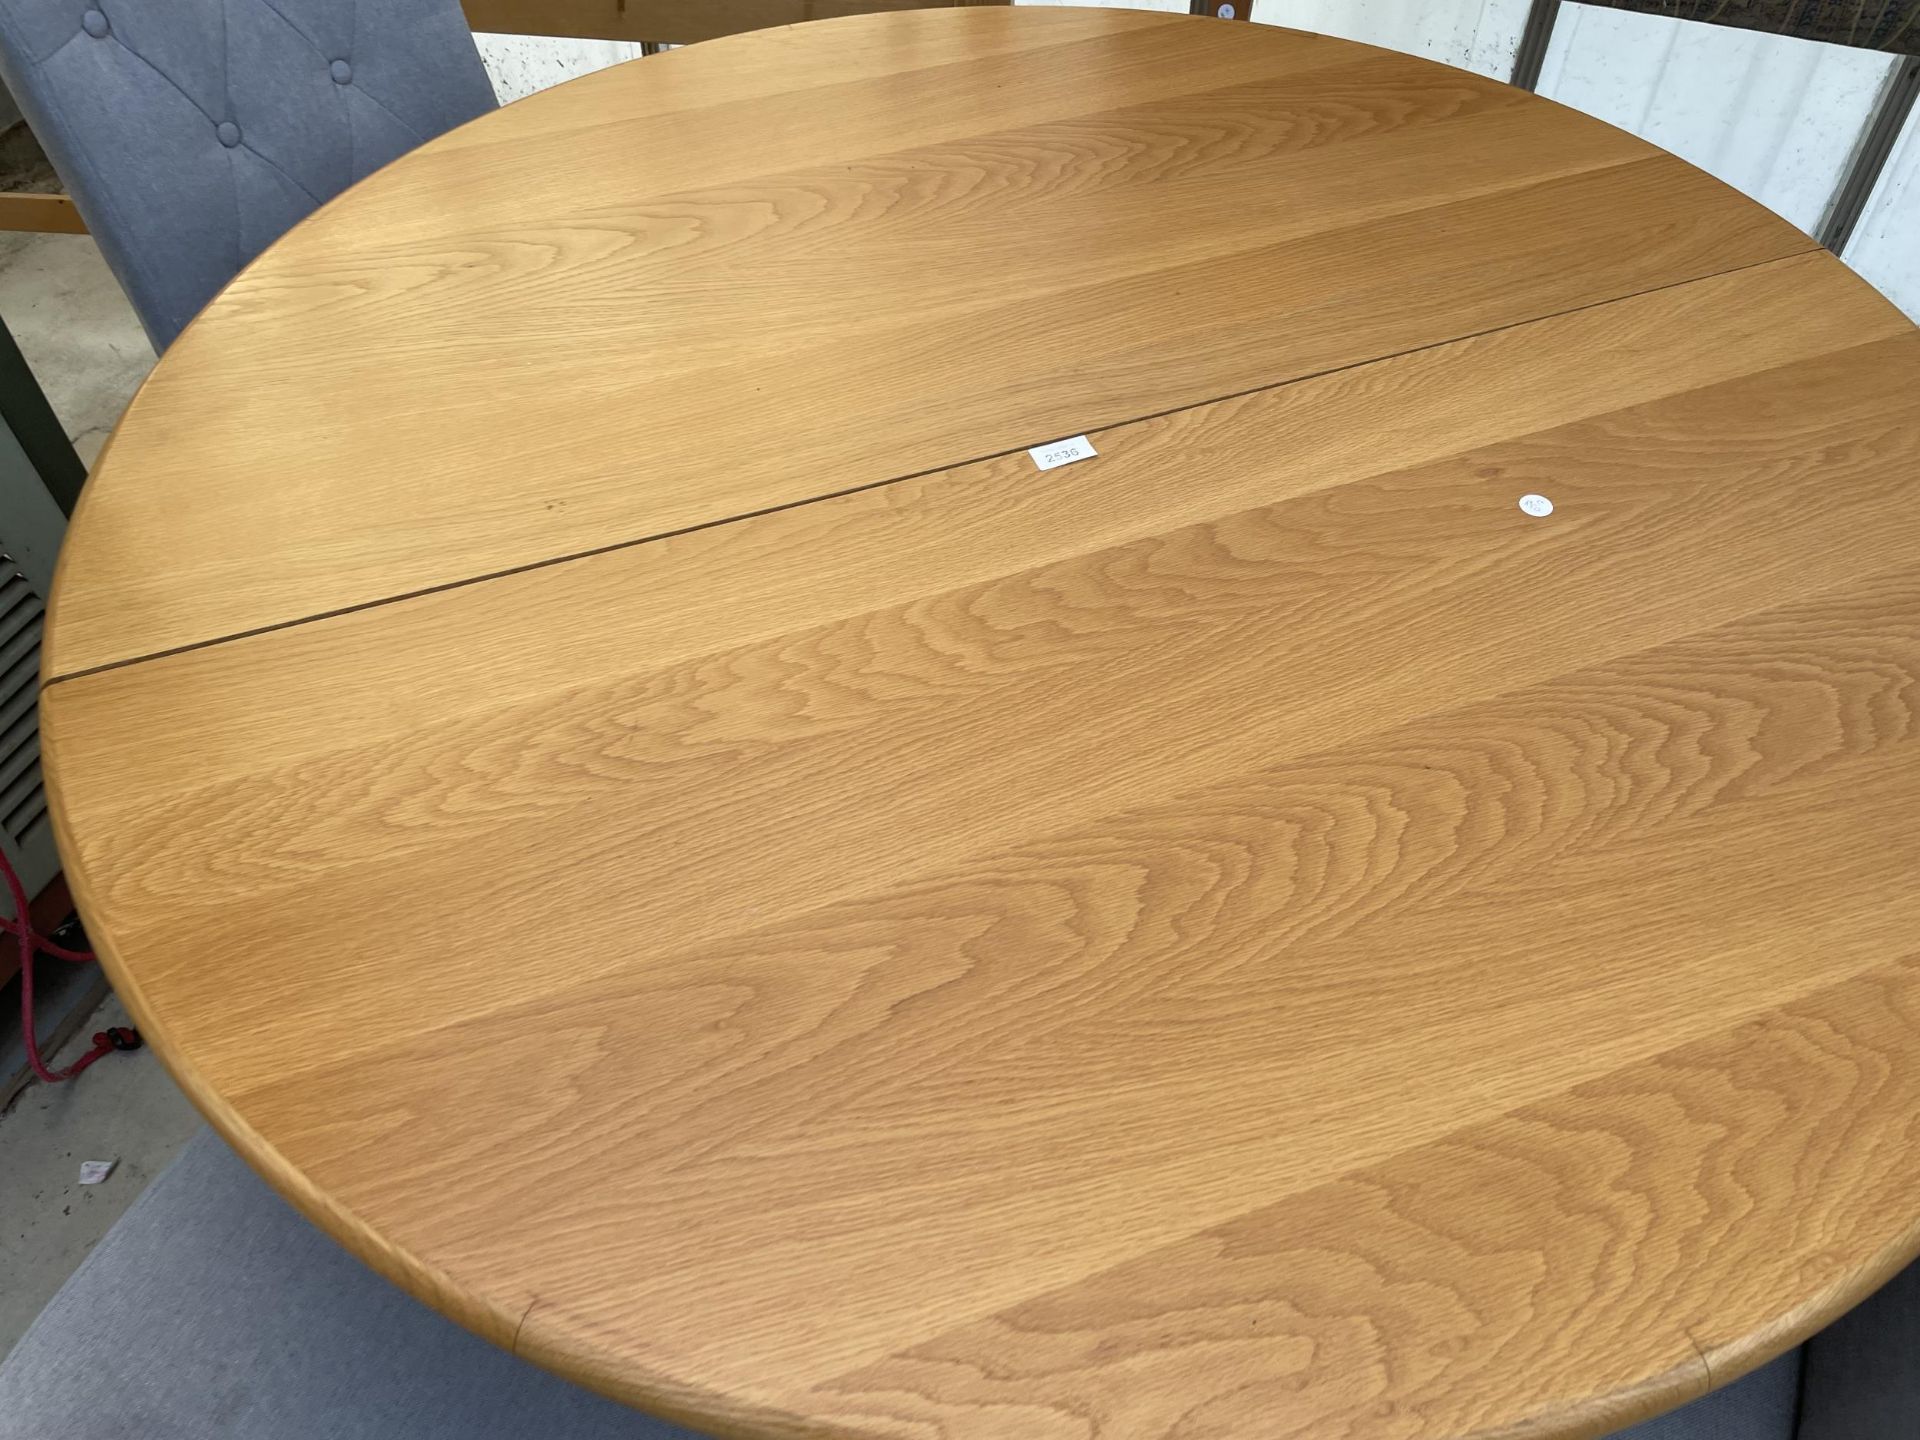 A MODERN OAK EXTENDING DINING TABLE, 47" DIAMETER (LEAF 16") AND FOUR DINING CHAIRS - Image 2 of 5